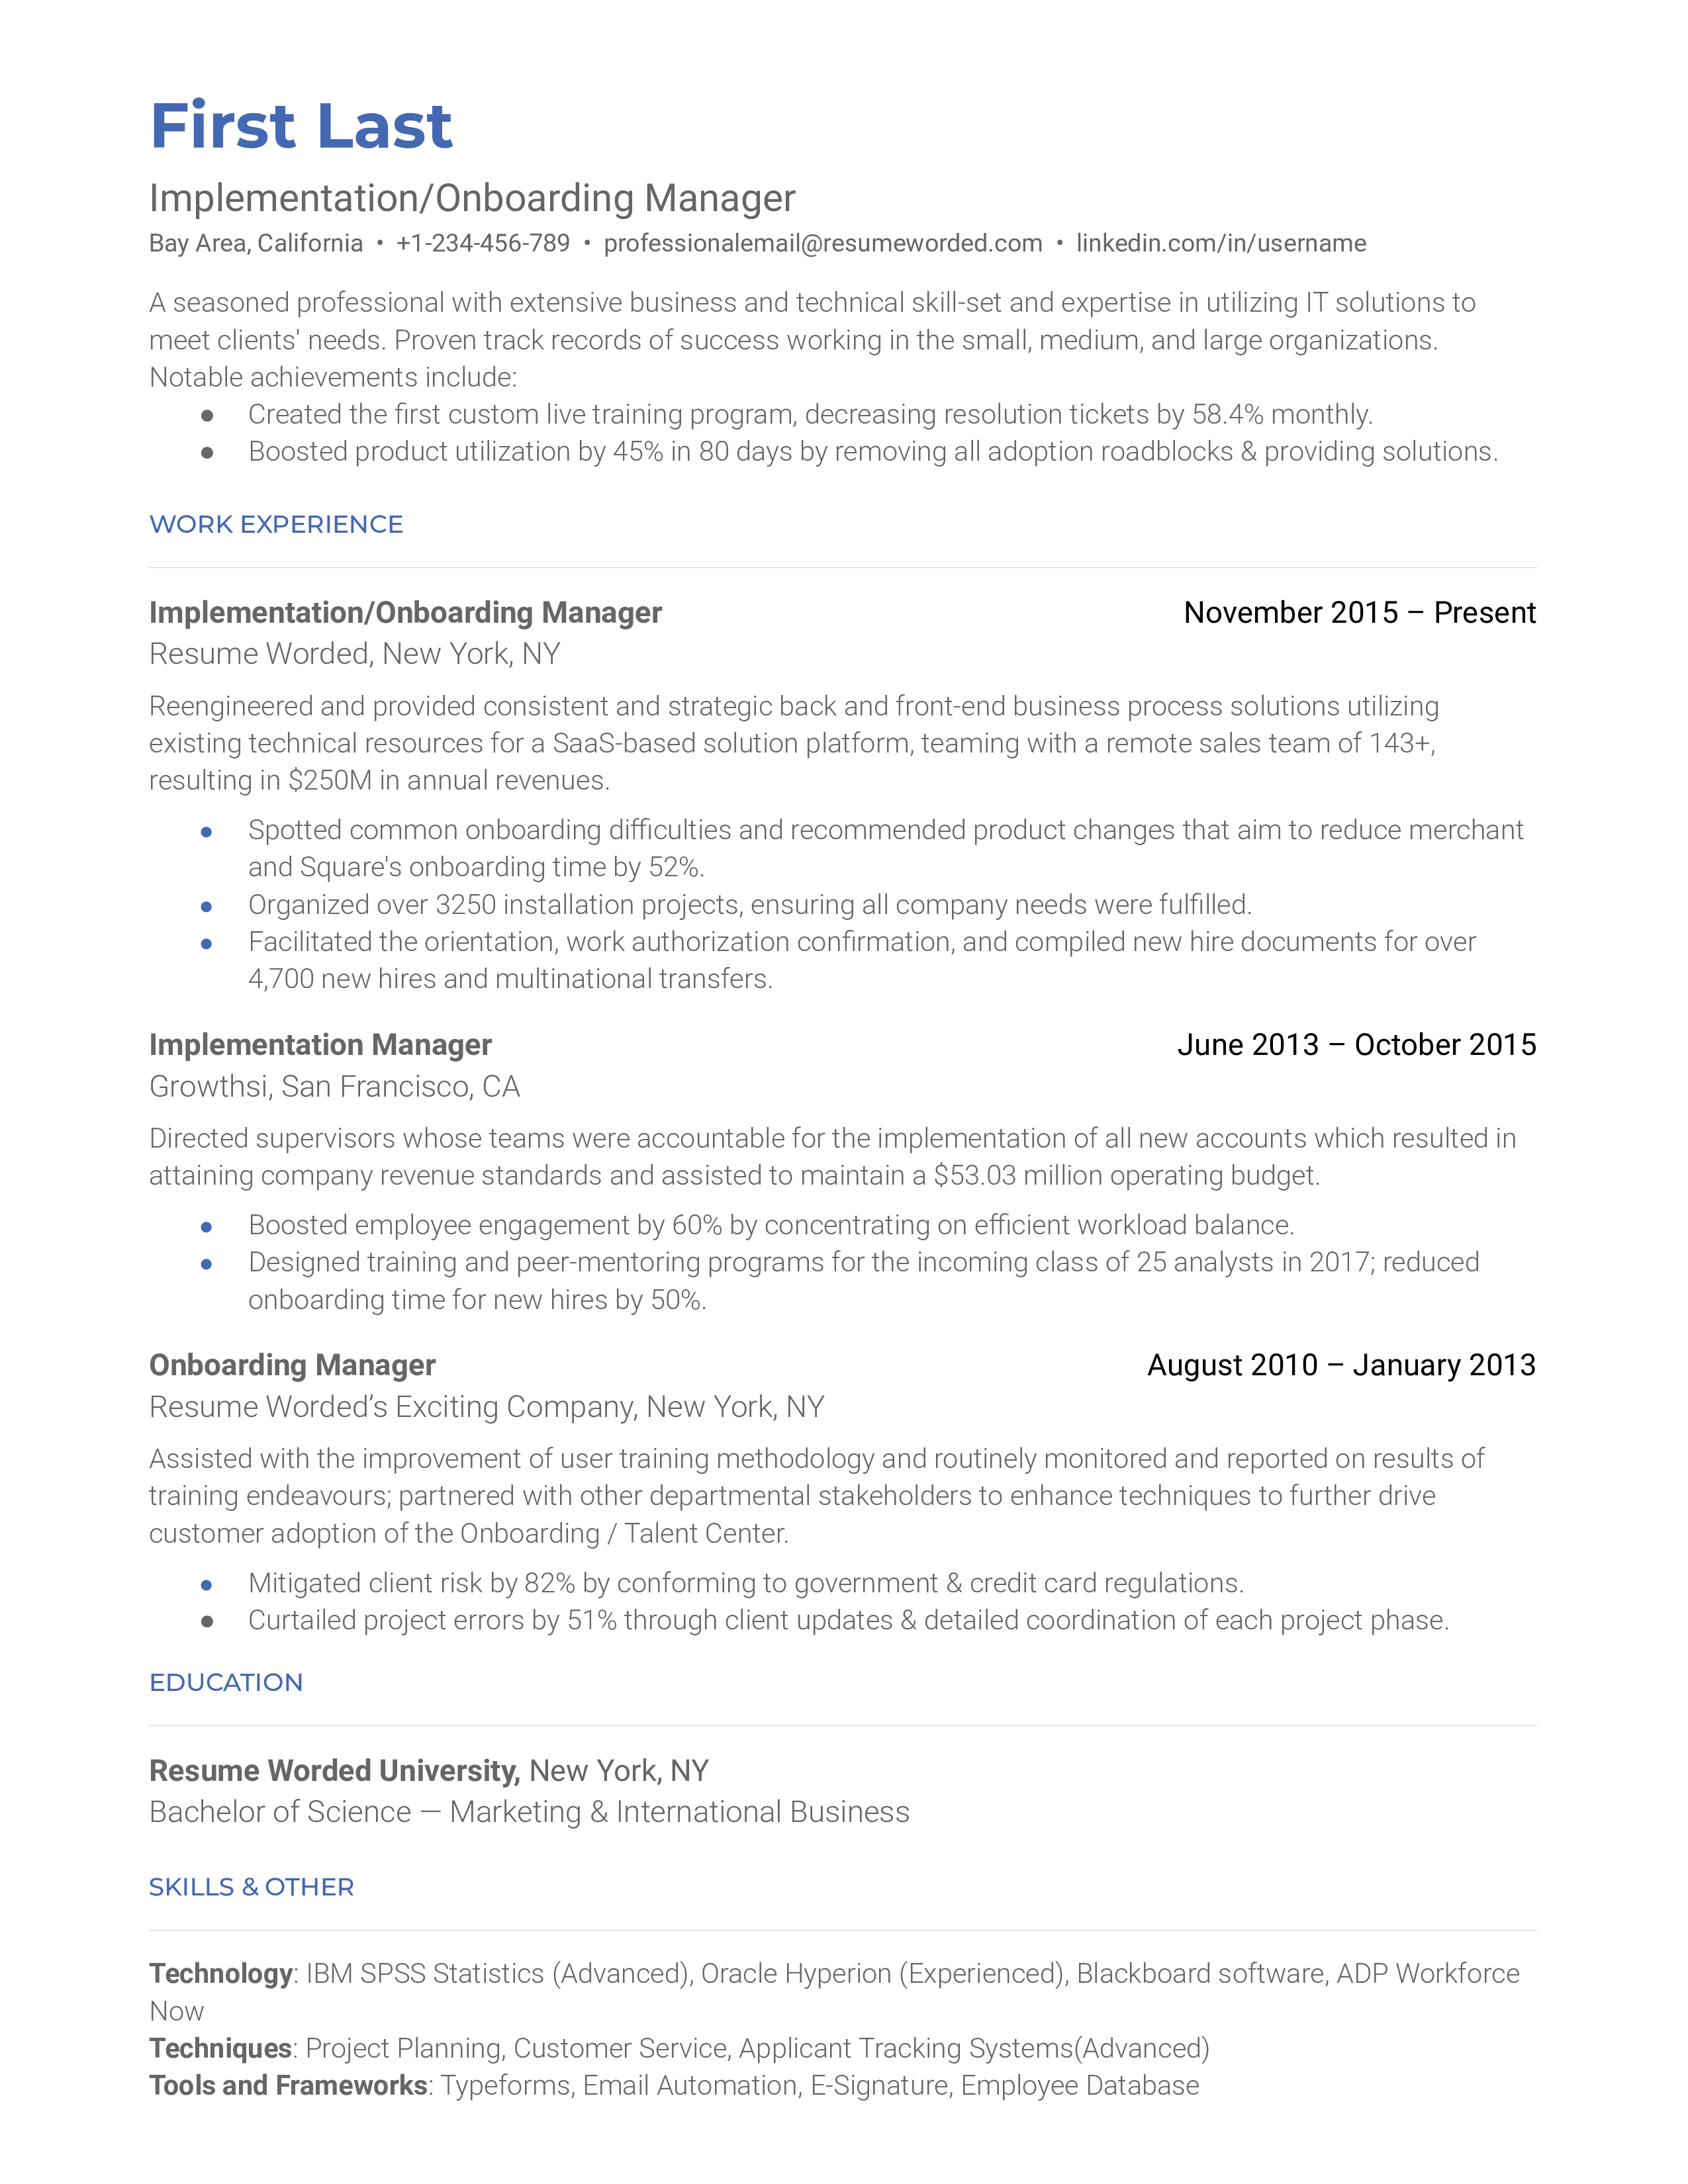 A well-structured CV of a seasoned Implementation/Onboarding Manager showcasing their experience and qualifications.